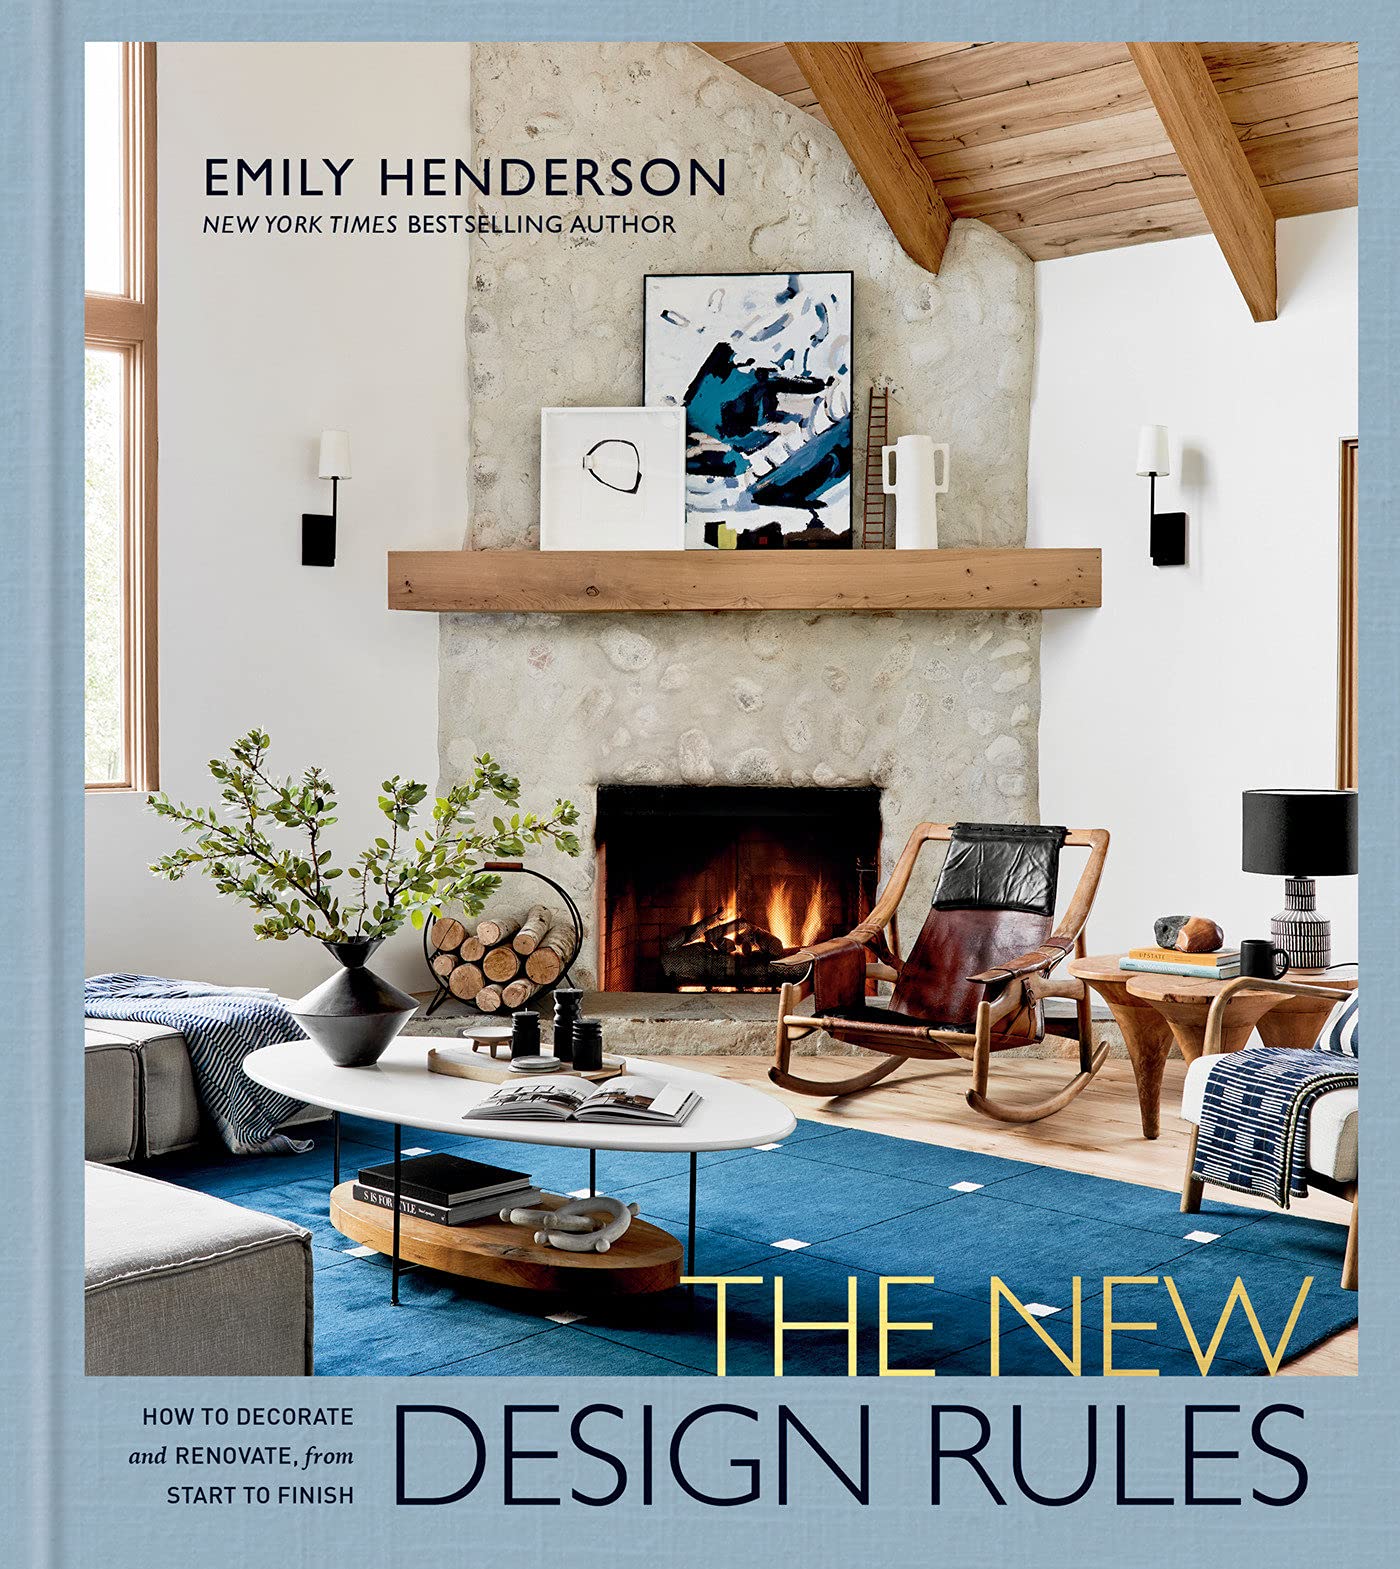 The New Design Rules | Emily Henderson, Jessica Cumberbatch Anderson